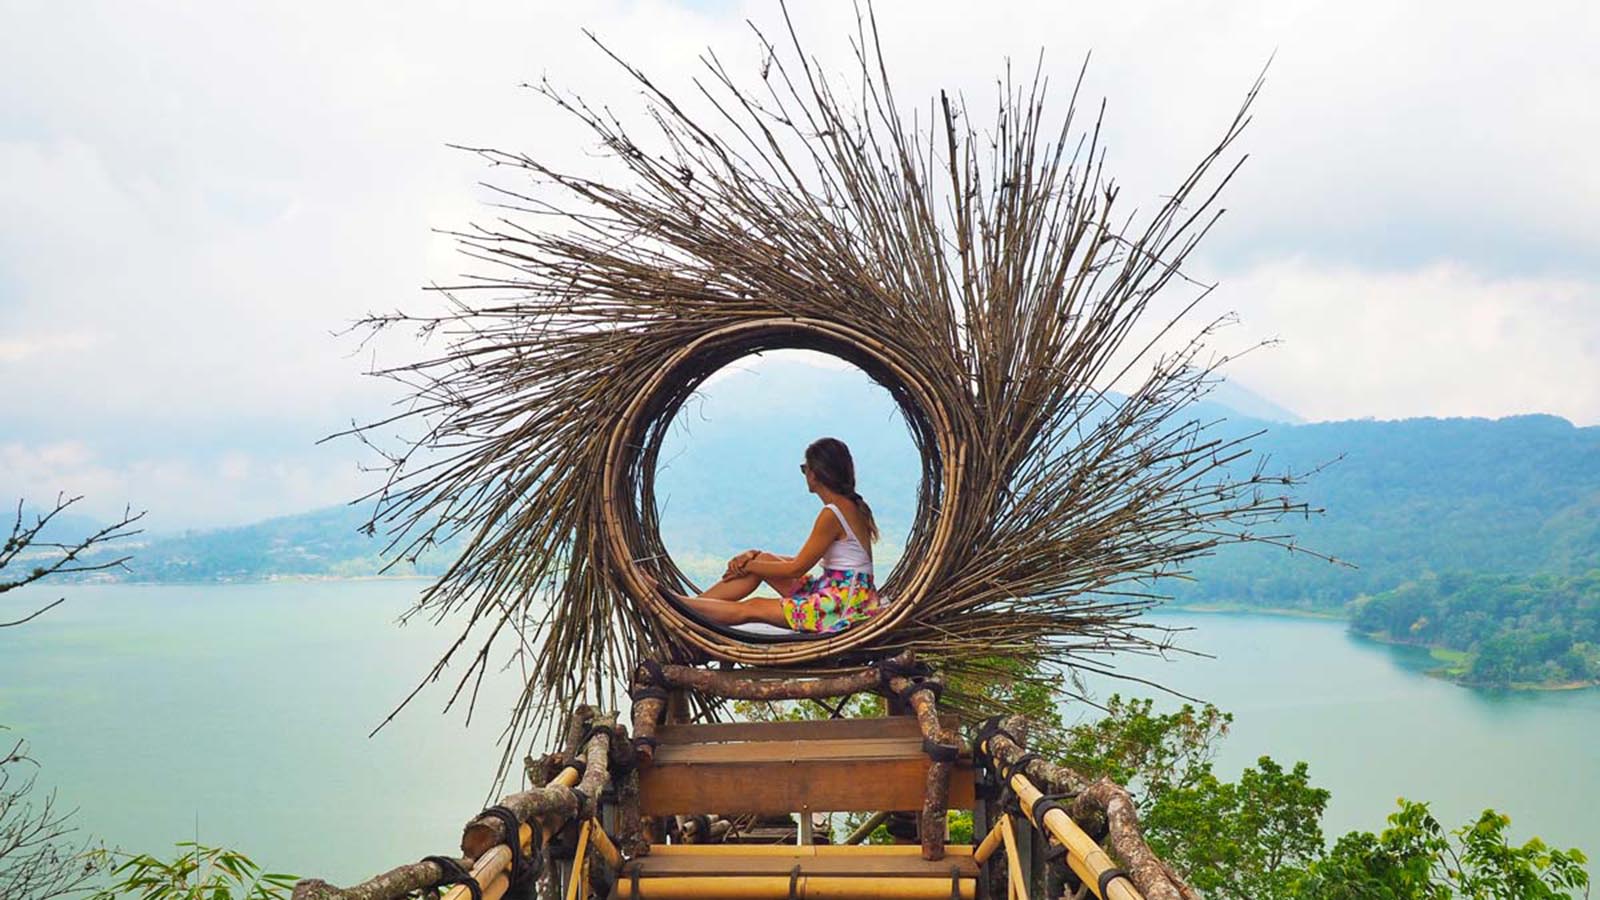 Bali Instagrammable Tour Swing Experience And Dinner In Ubud Images, Photos, Reviews